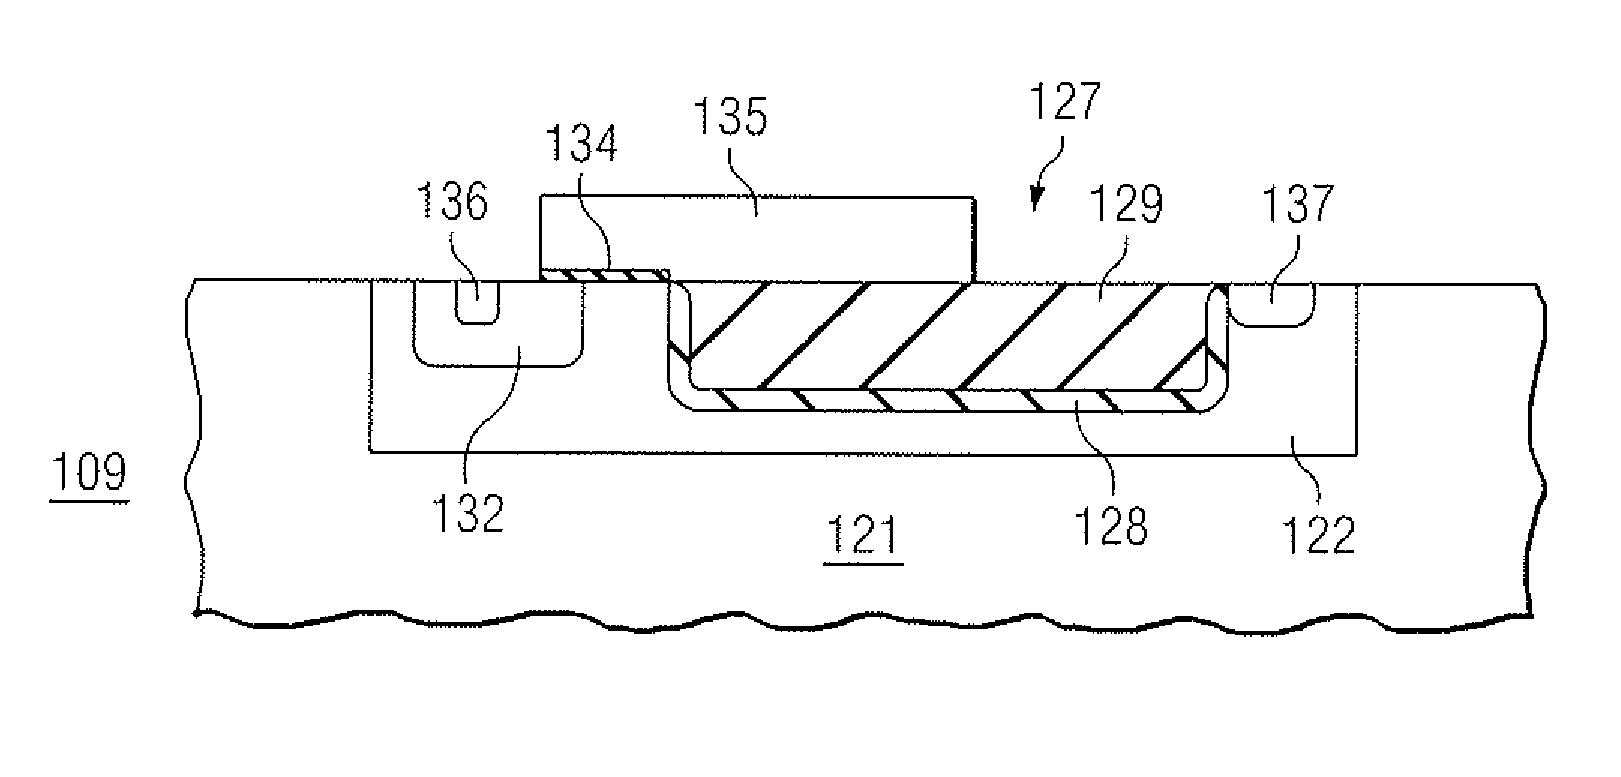 Methods of manufacturing trench isolated drain extended MOS (demos) transistors and integrated circuits therefrom